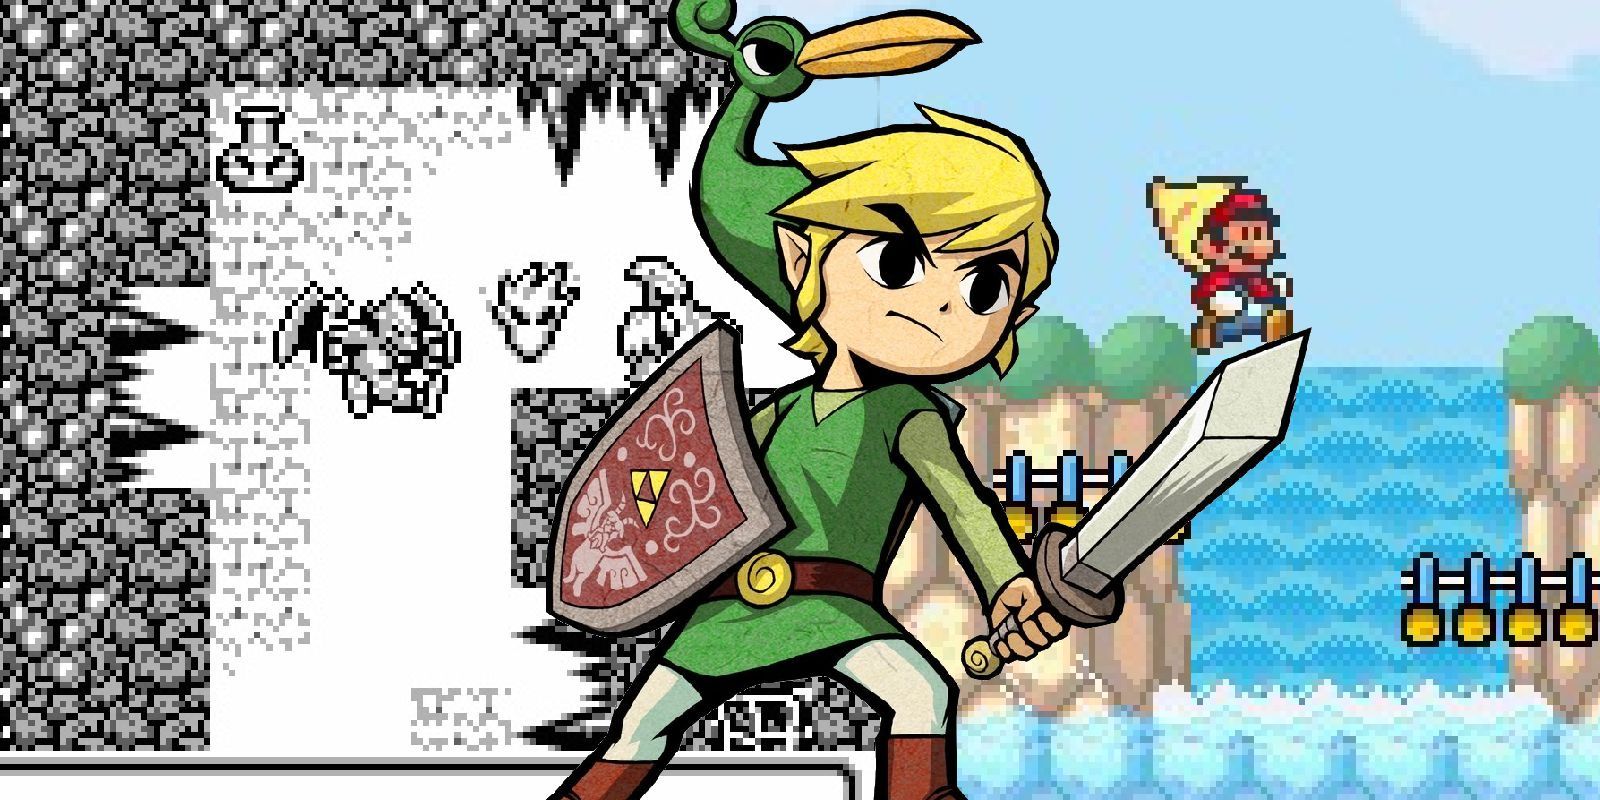 Best Gameboy and GBA games on Nintendo switch online